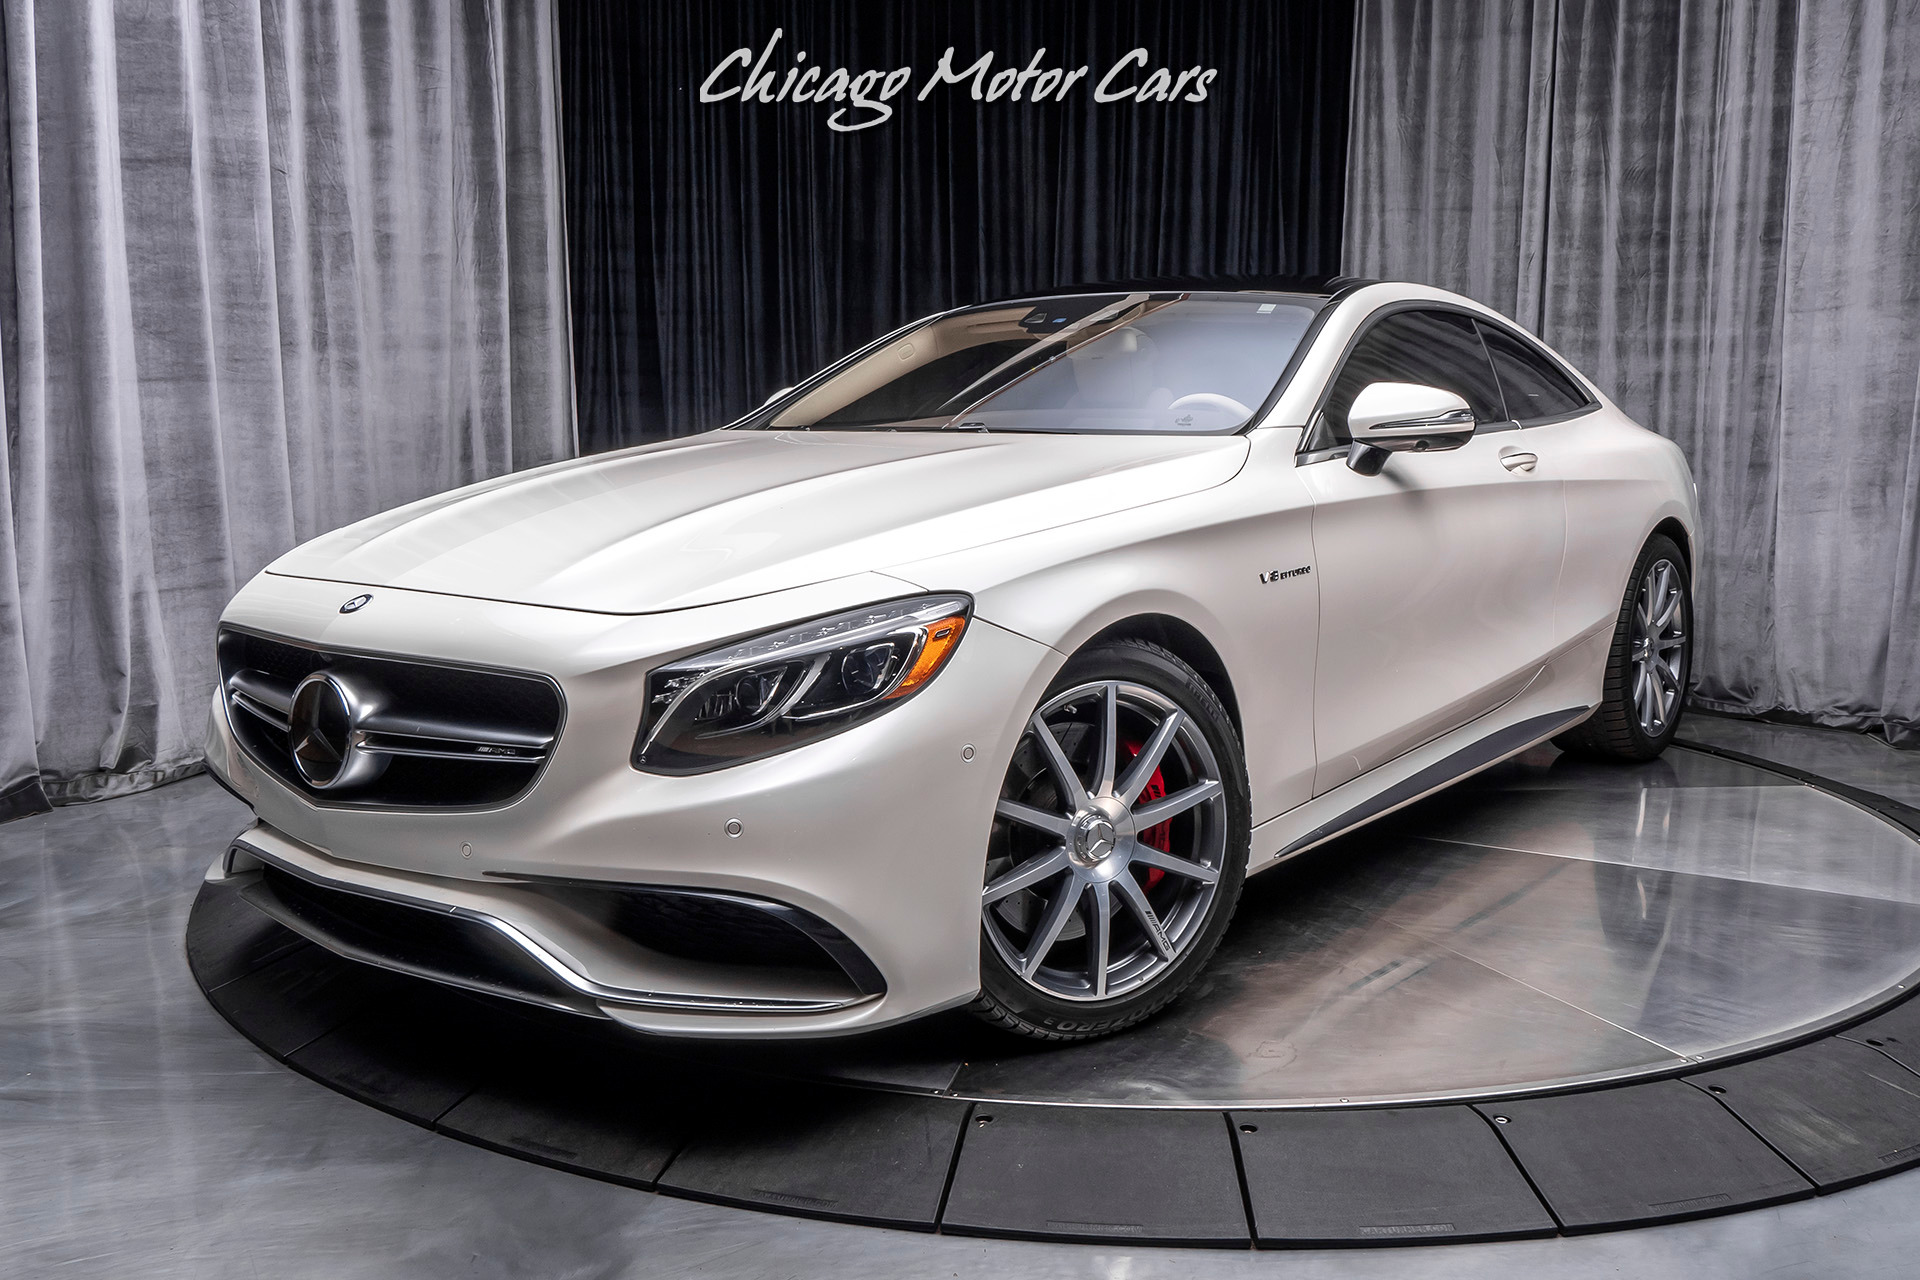 Used-2015-Mercedes-Benz-S63-AMG-4Matic-Coupe-MSRP-171070-ONLY-16K-MILES